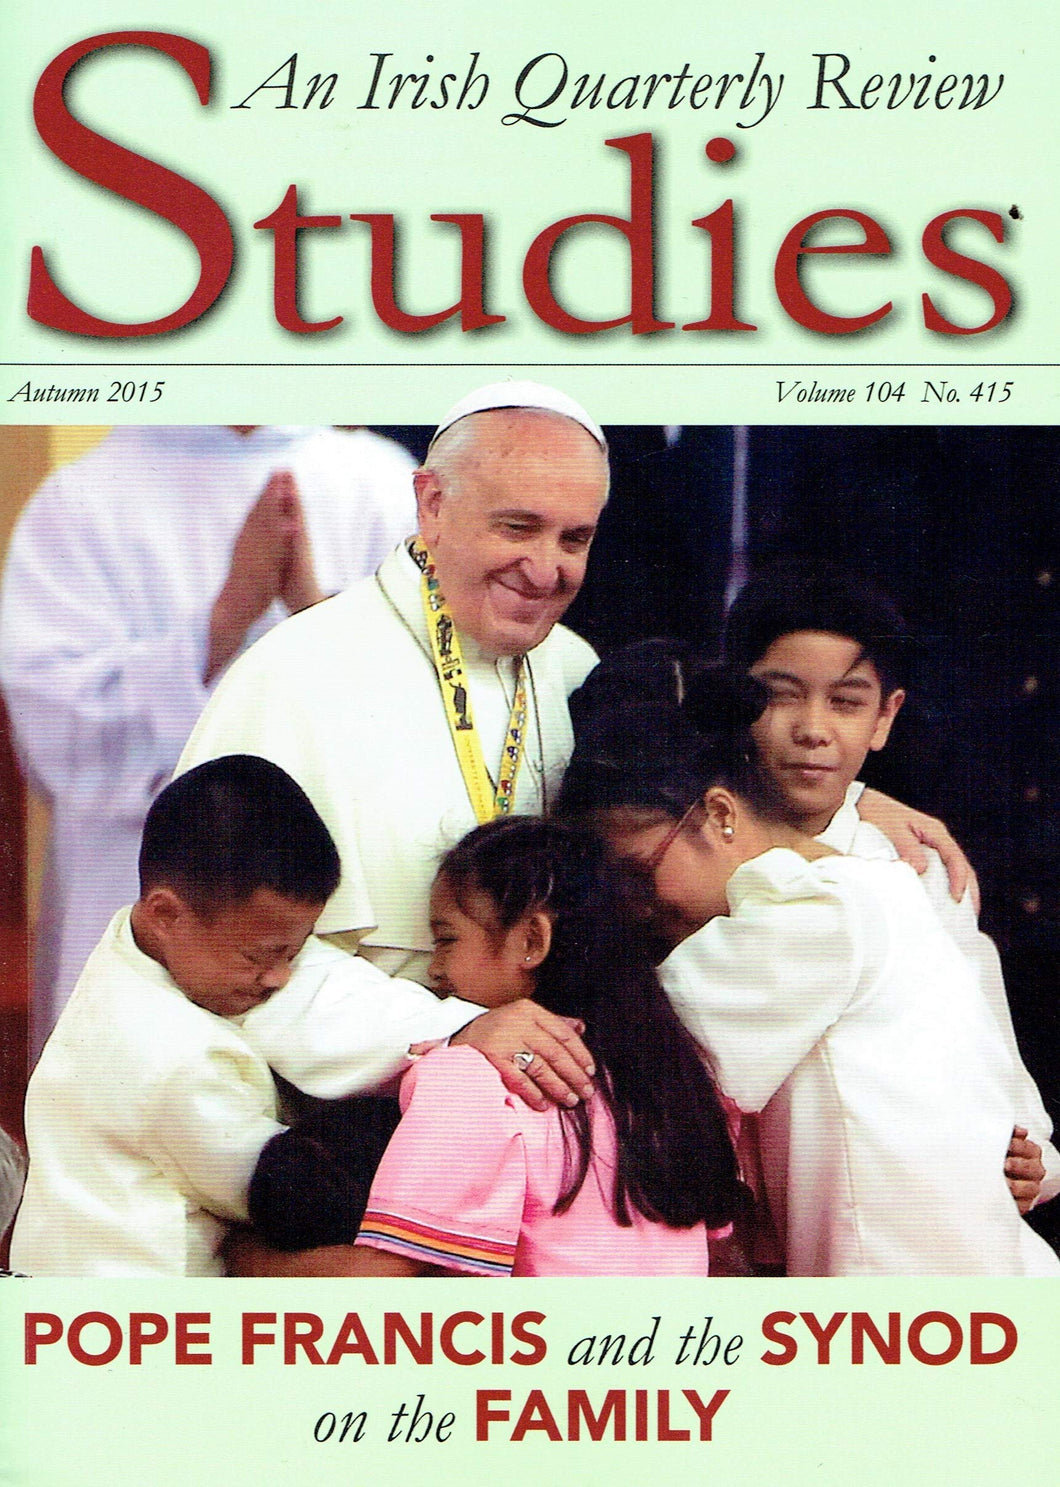 Studies: An Irish Quarterly Review - Autumn 2015, Volume 104, No. 415 - Pope Francis and the Synod on the Family